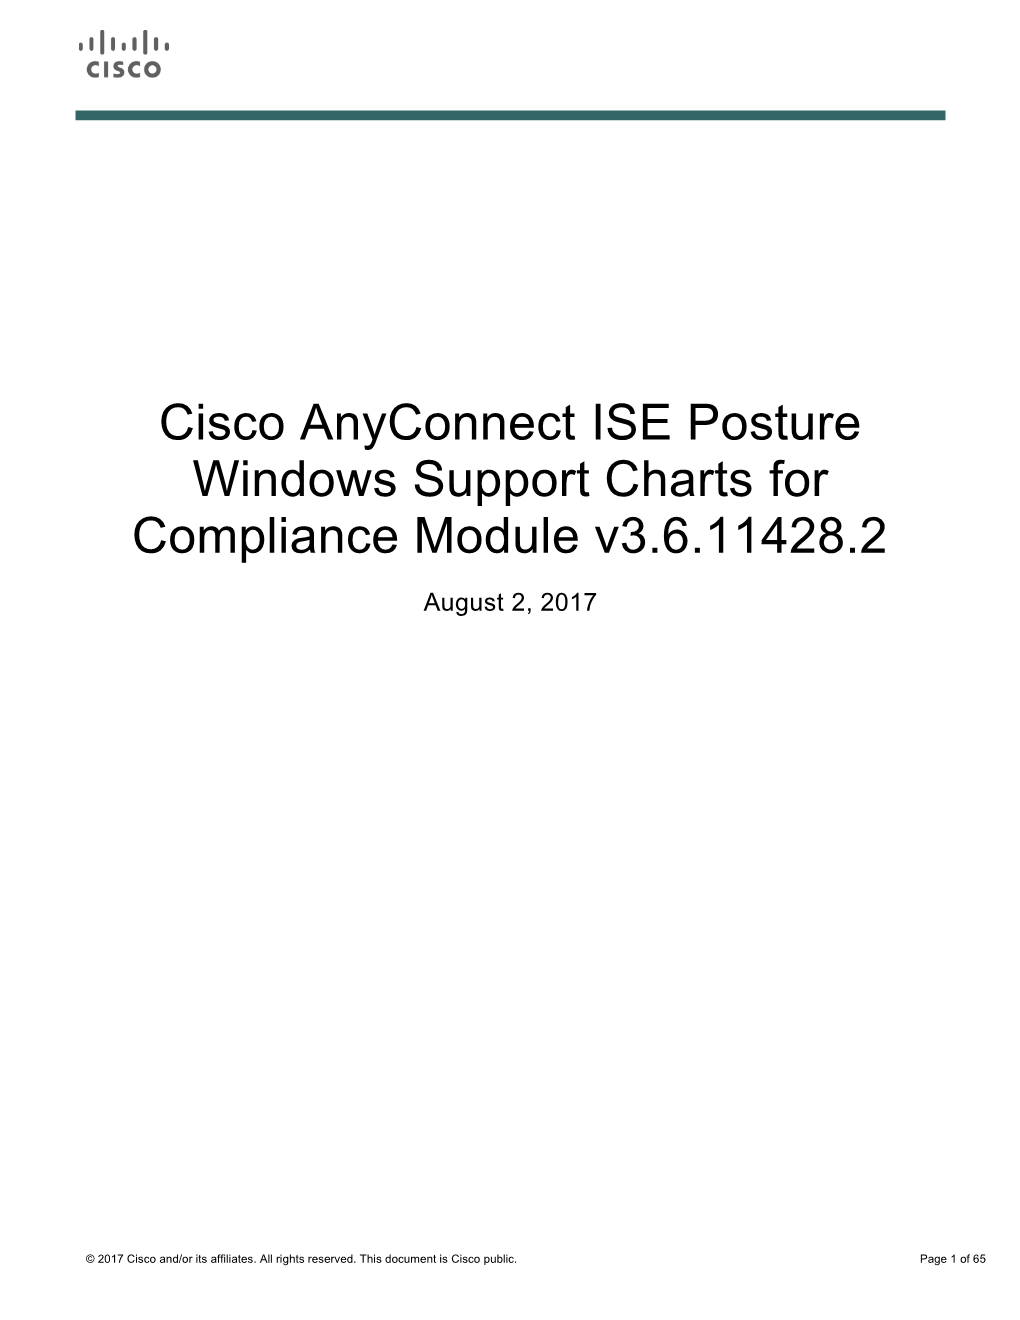 Cisco Anyconnect ISE Posture Windows Support Charts for Compliance Module V3.6.11428.2